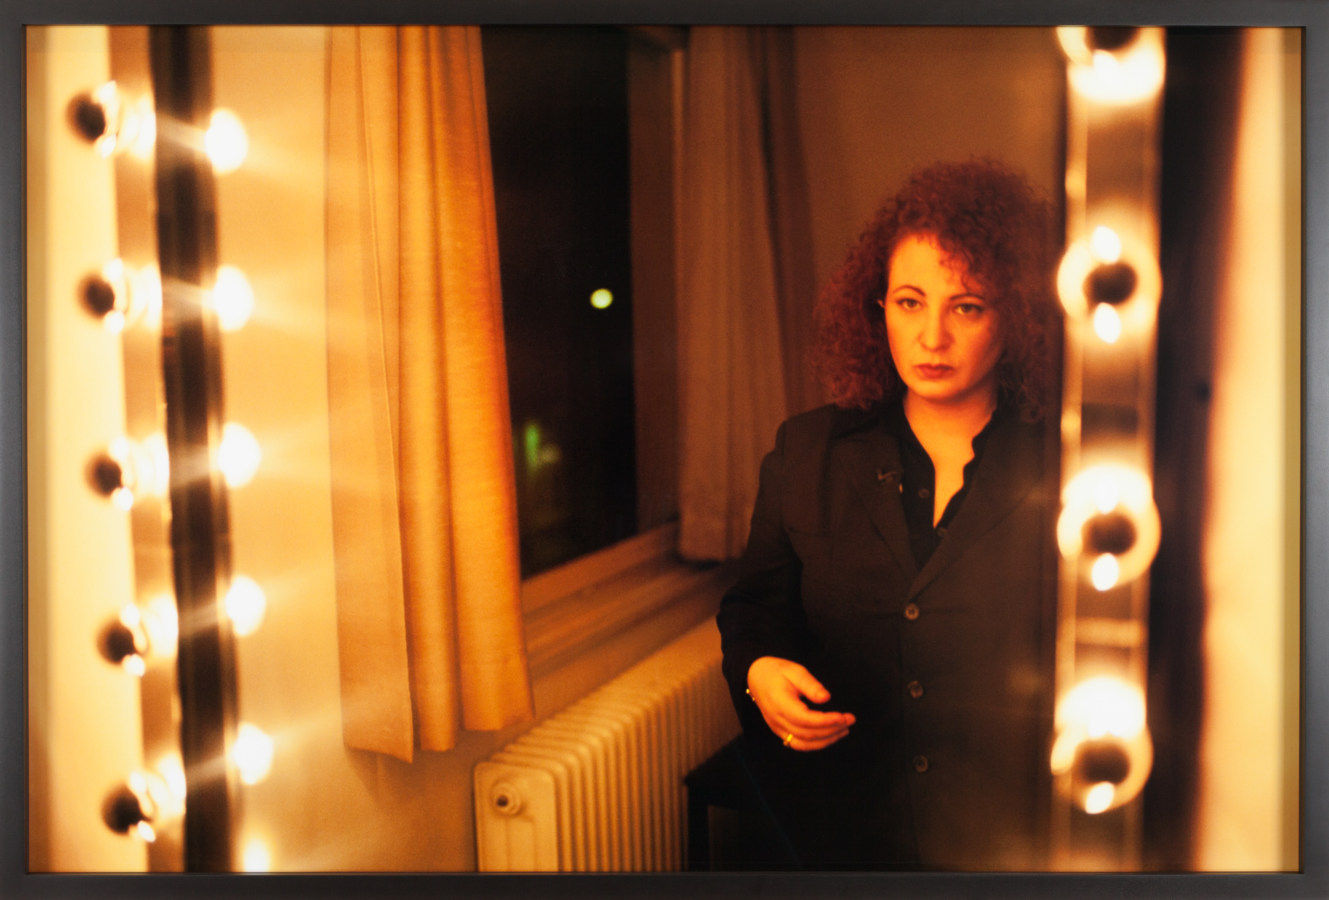 Color photograph of a woman looking at her reflection in a vanity mirror